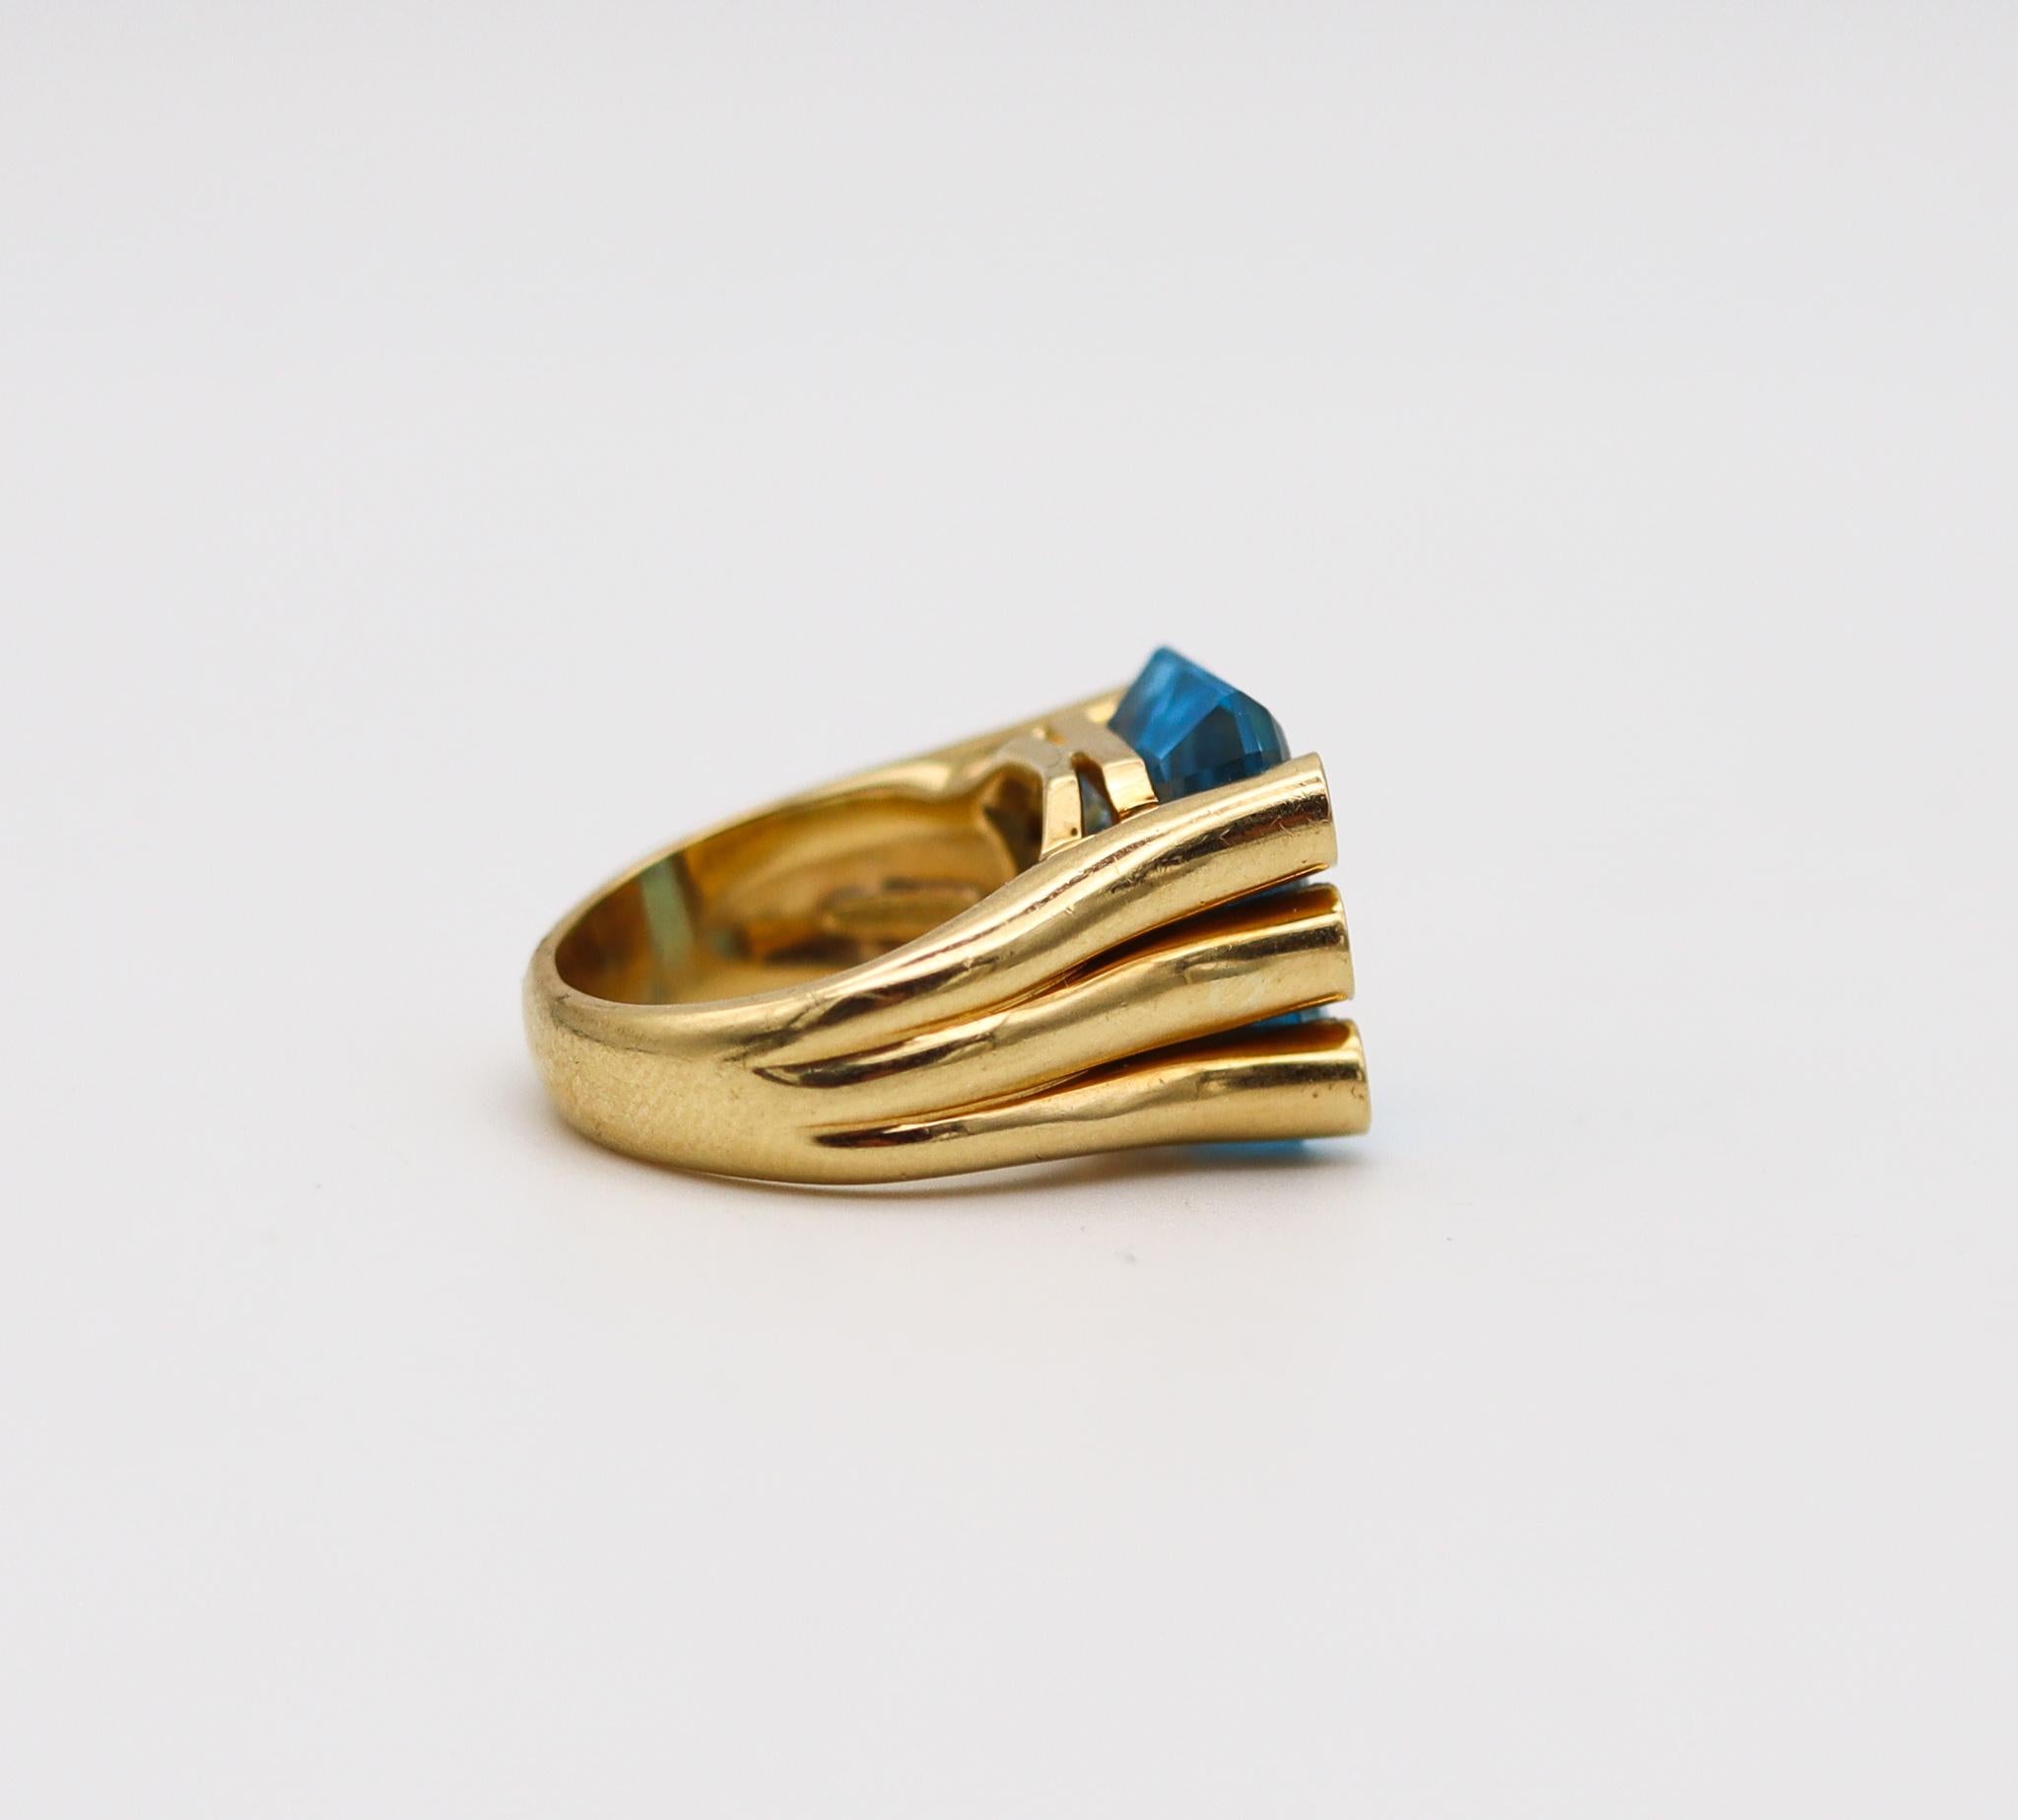 Brilliant Cut Verdura Milan Cocktail Ring In 18Kt Yellow Gold With 14.78 Ctw Topaz & Diamonds